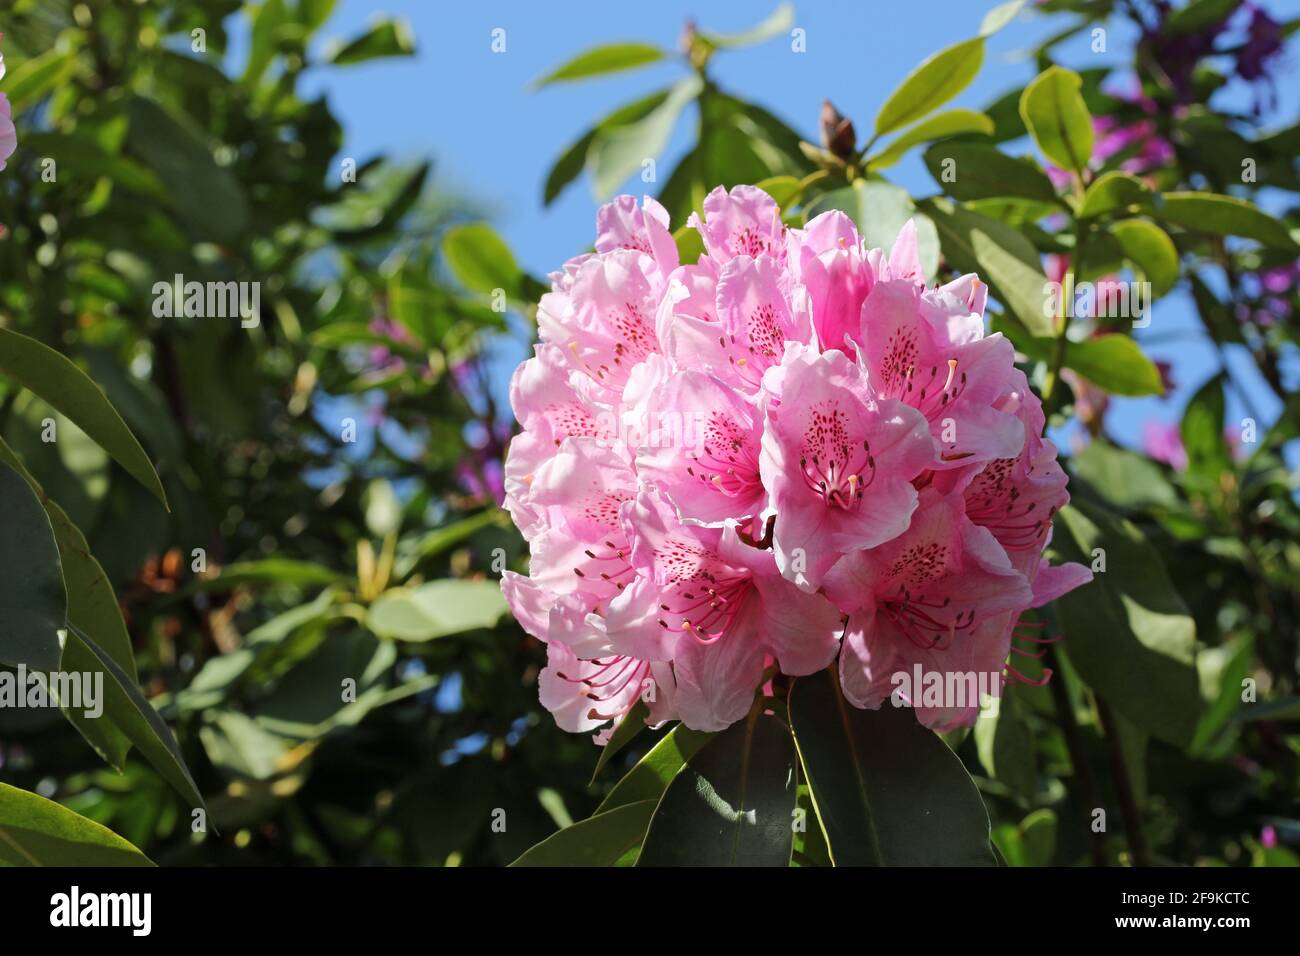 Pink Rhododendron flowers with dark pink spots on the petals with a blurred background of leaves and blue sky and good copy space. Stock Photo